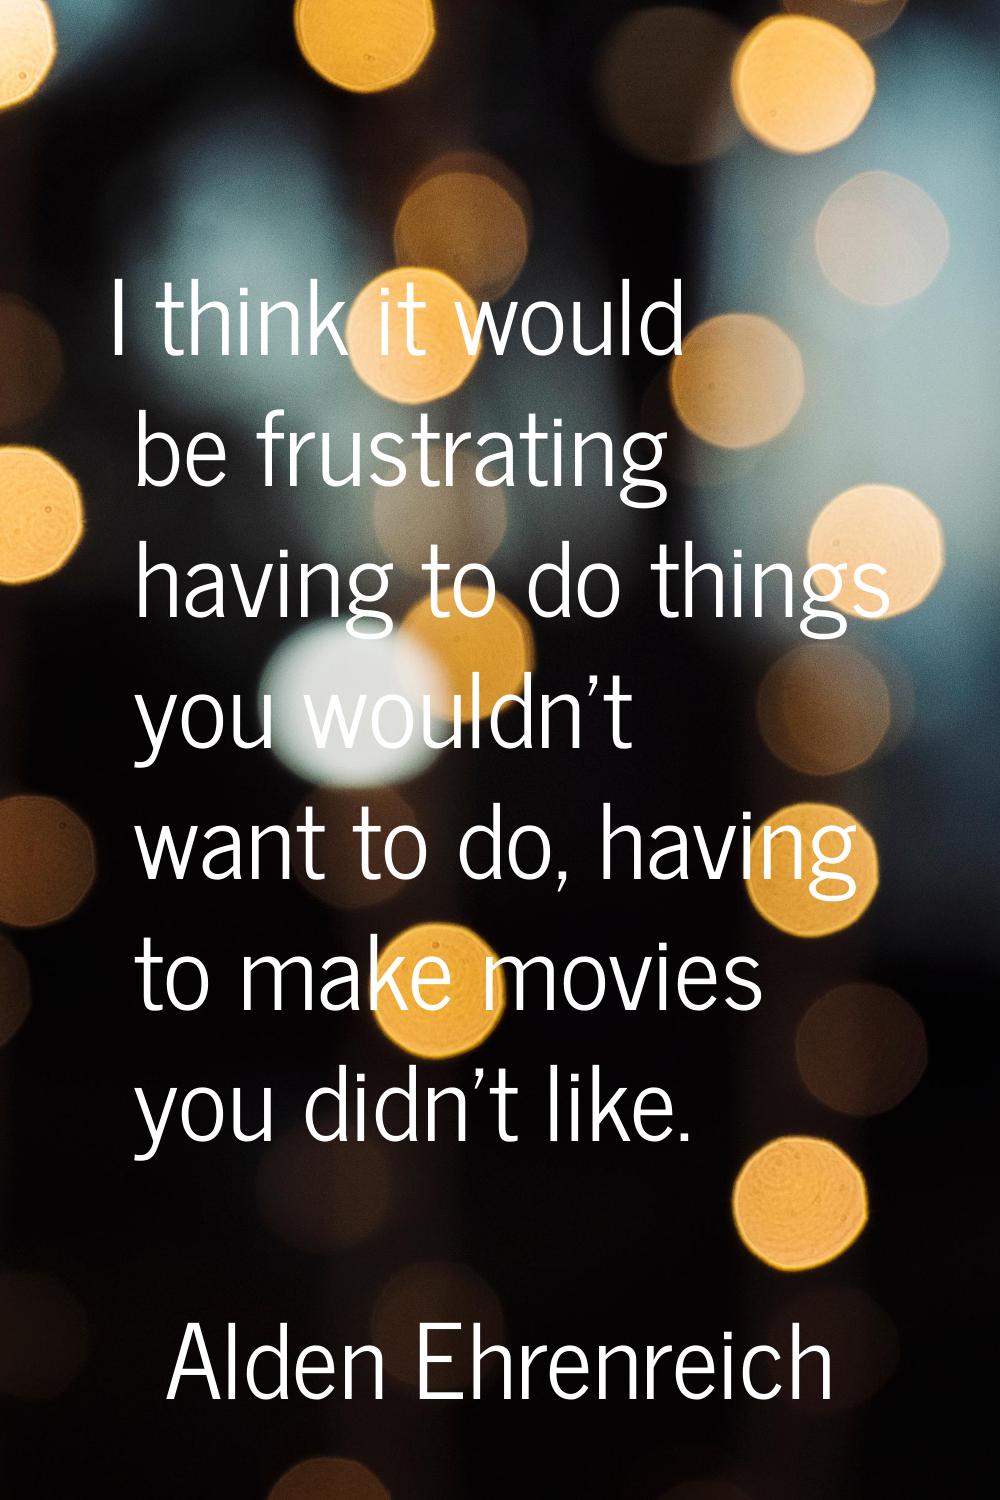 I think it would be frustrating having to do things you wouldn't want to do, having to make movies 